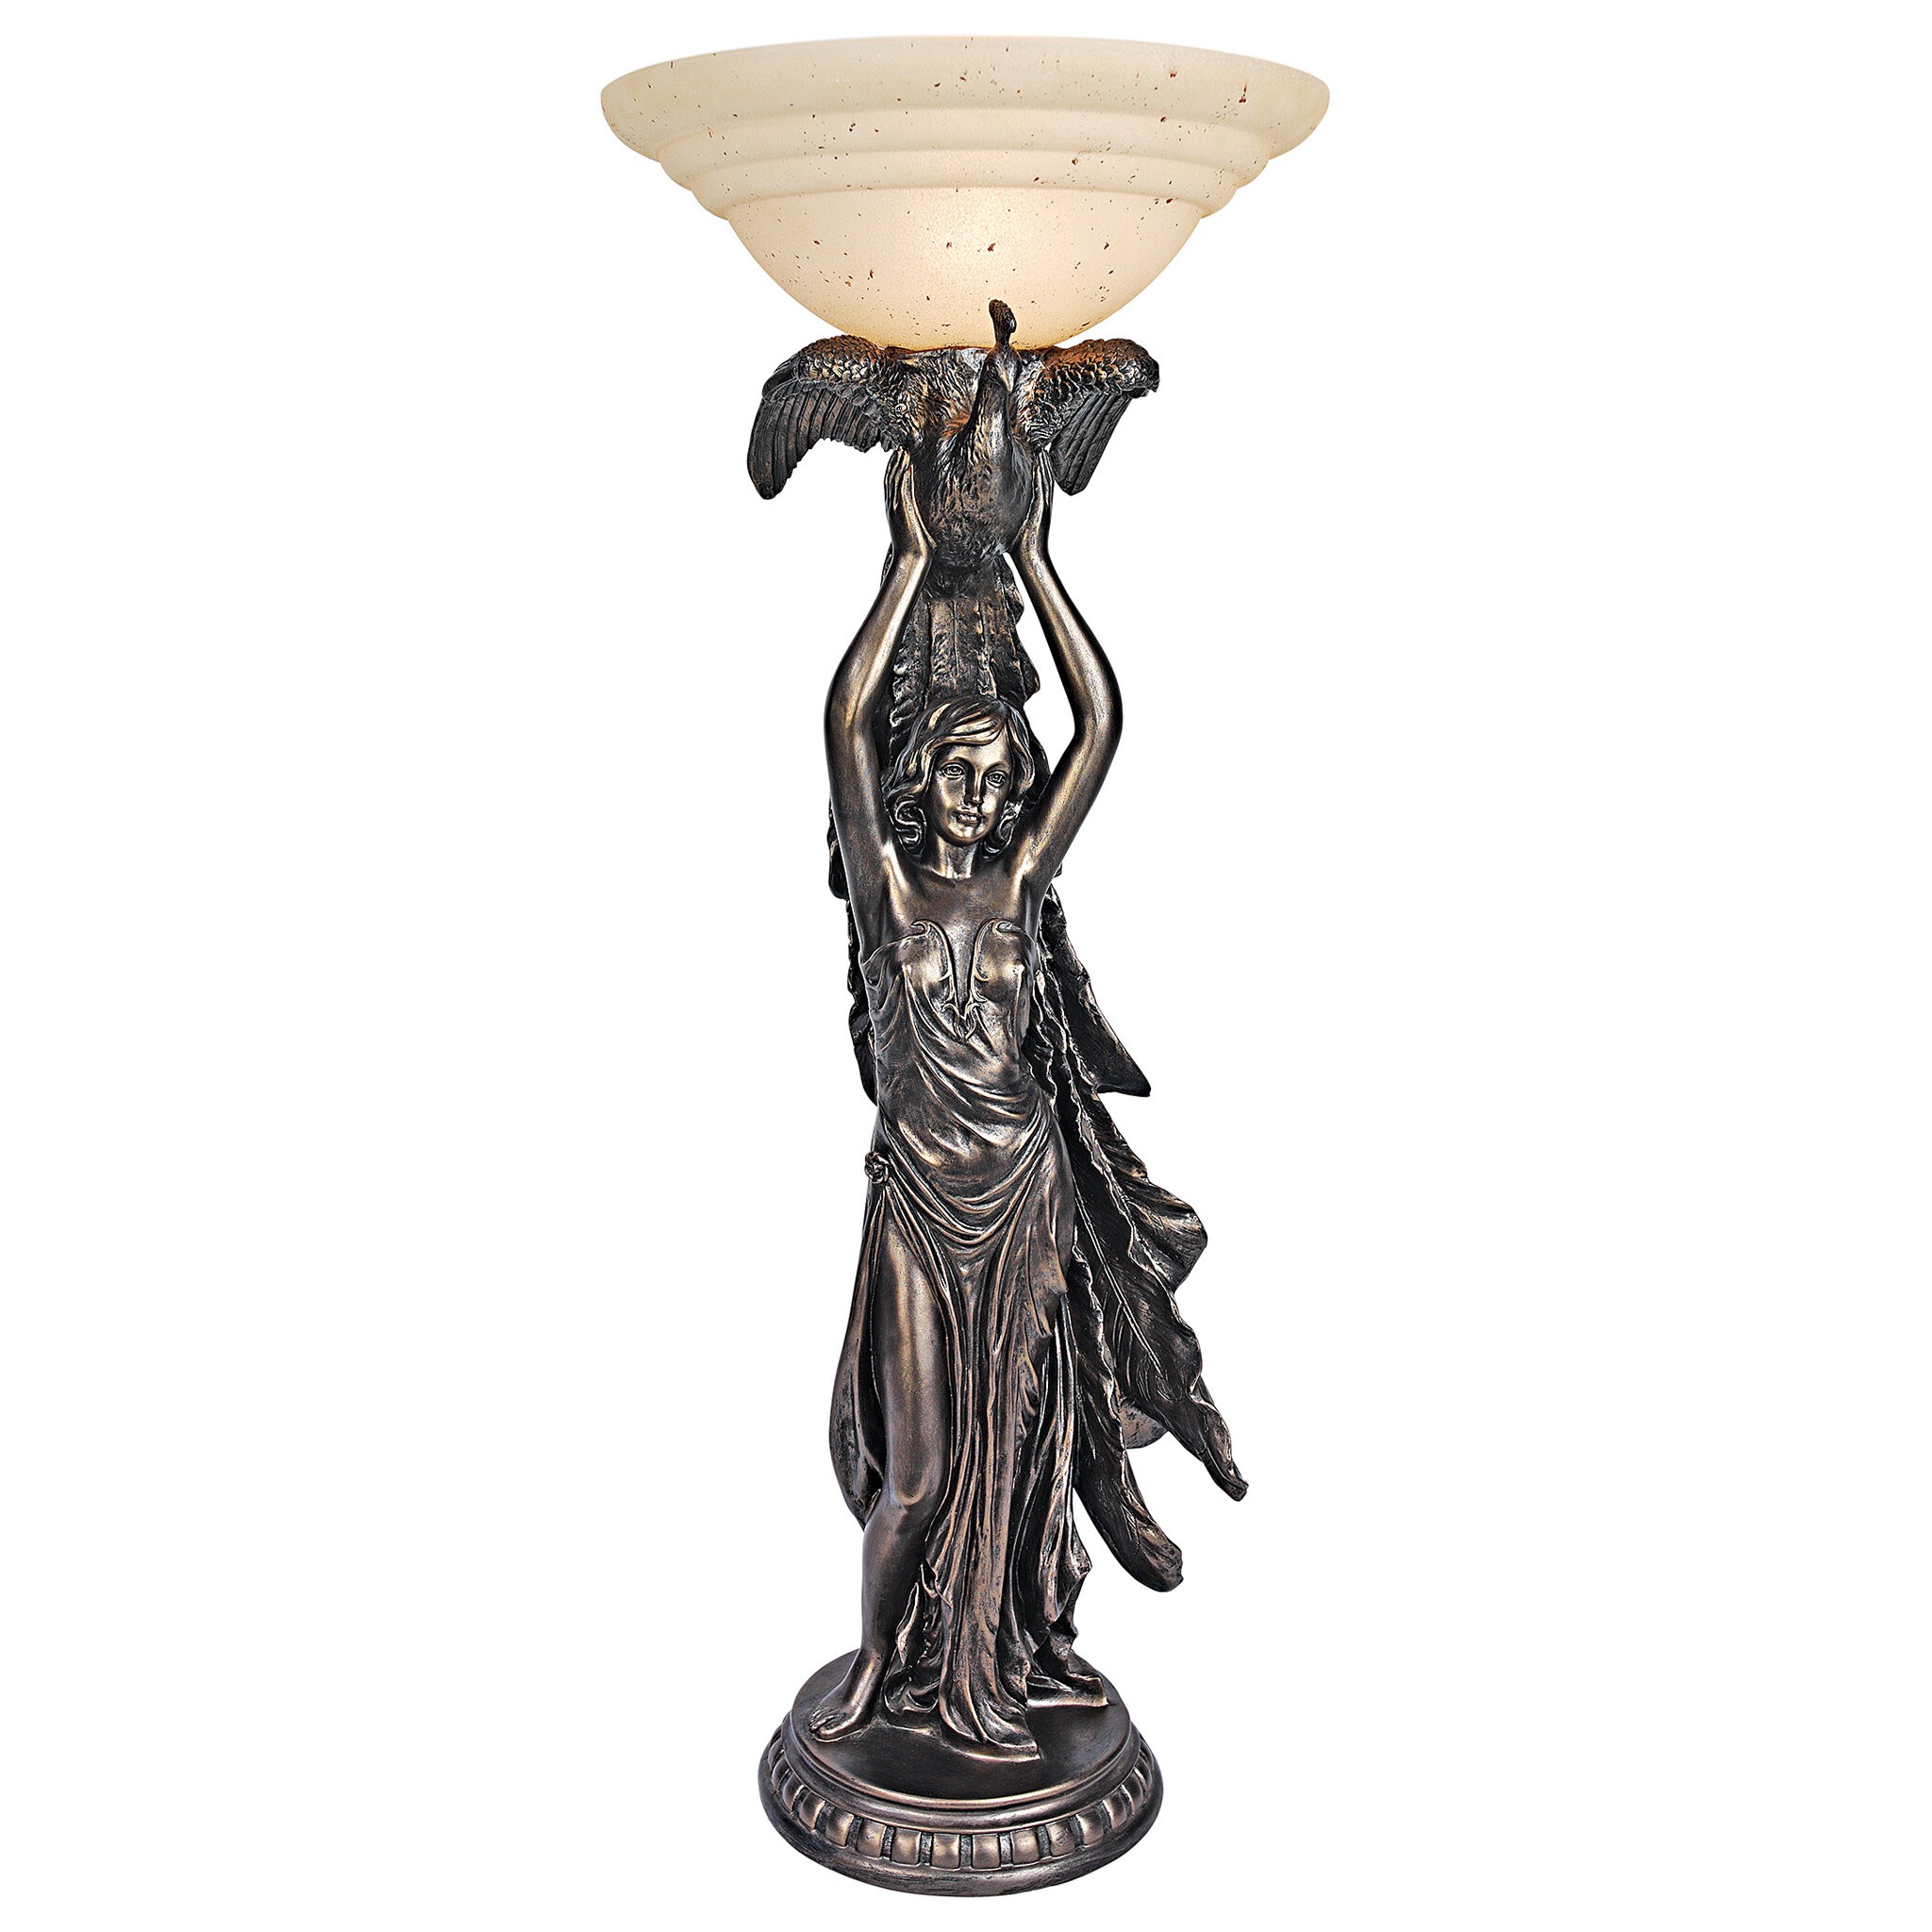 The Peacock Goddess Torchiere 41" H Table Lamp with Empire Shade